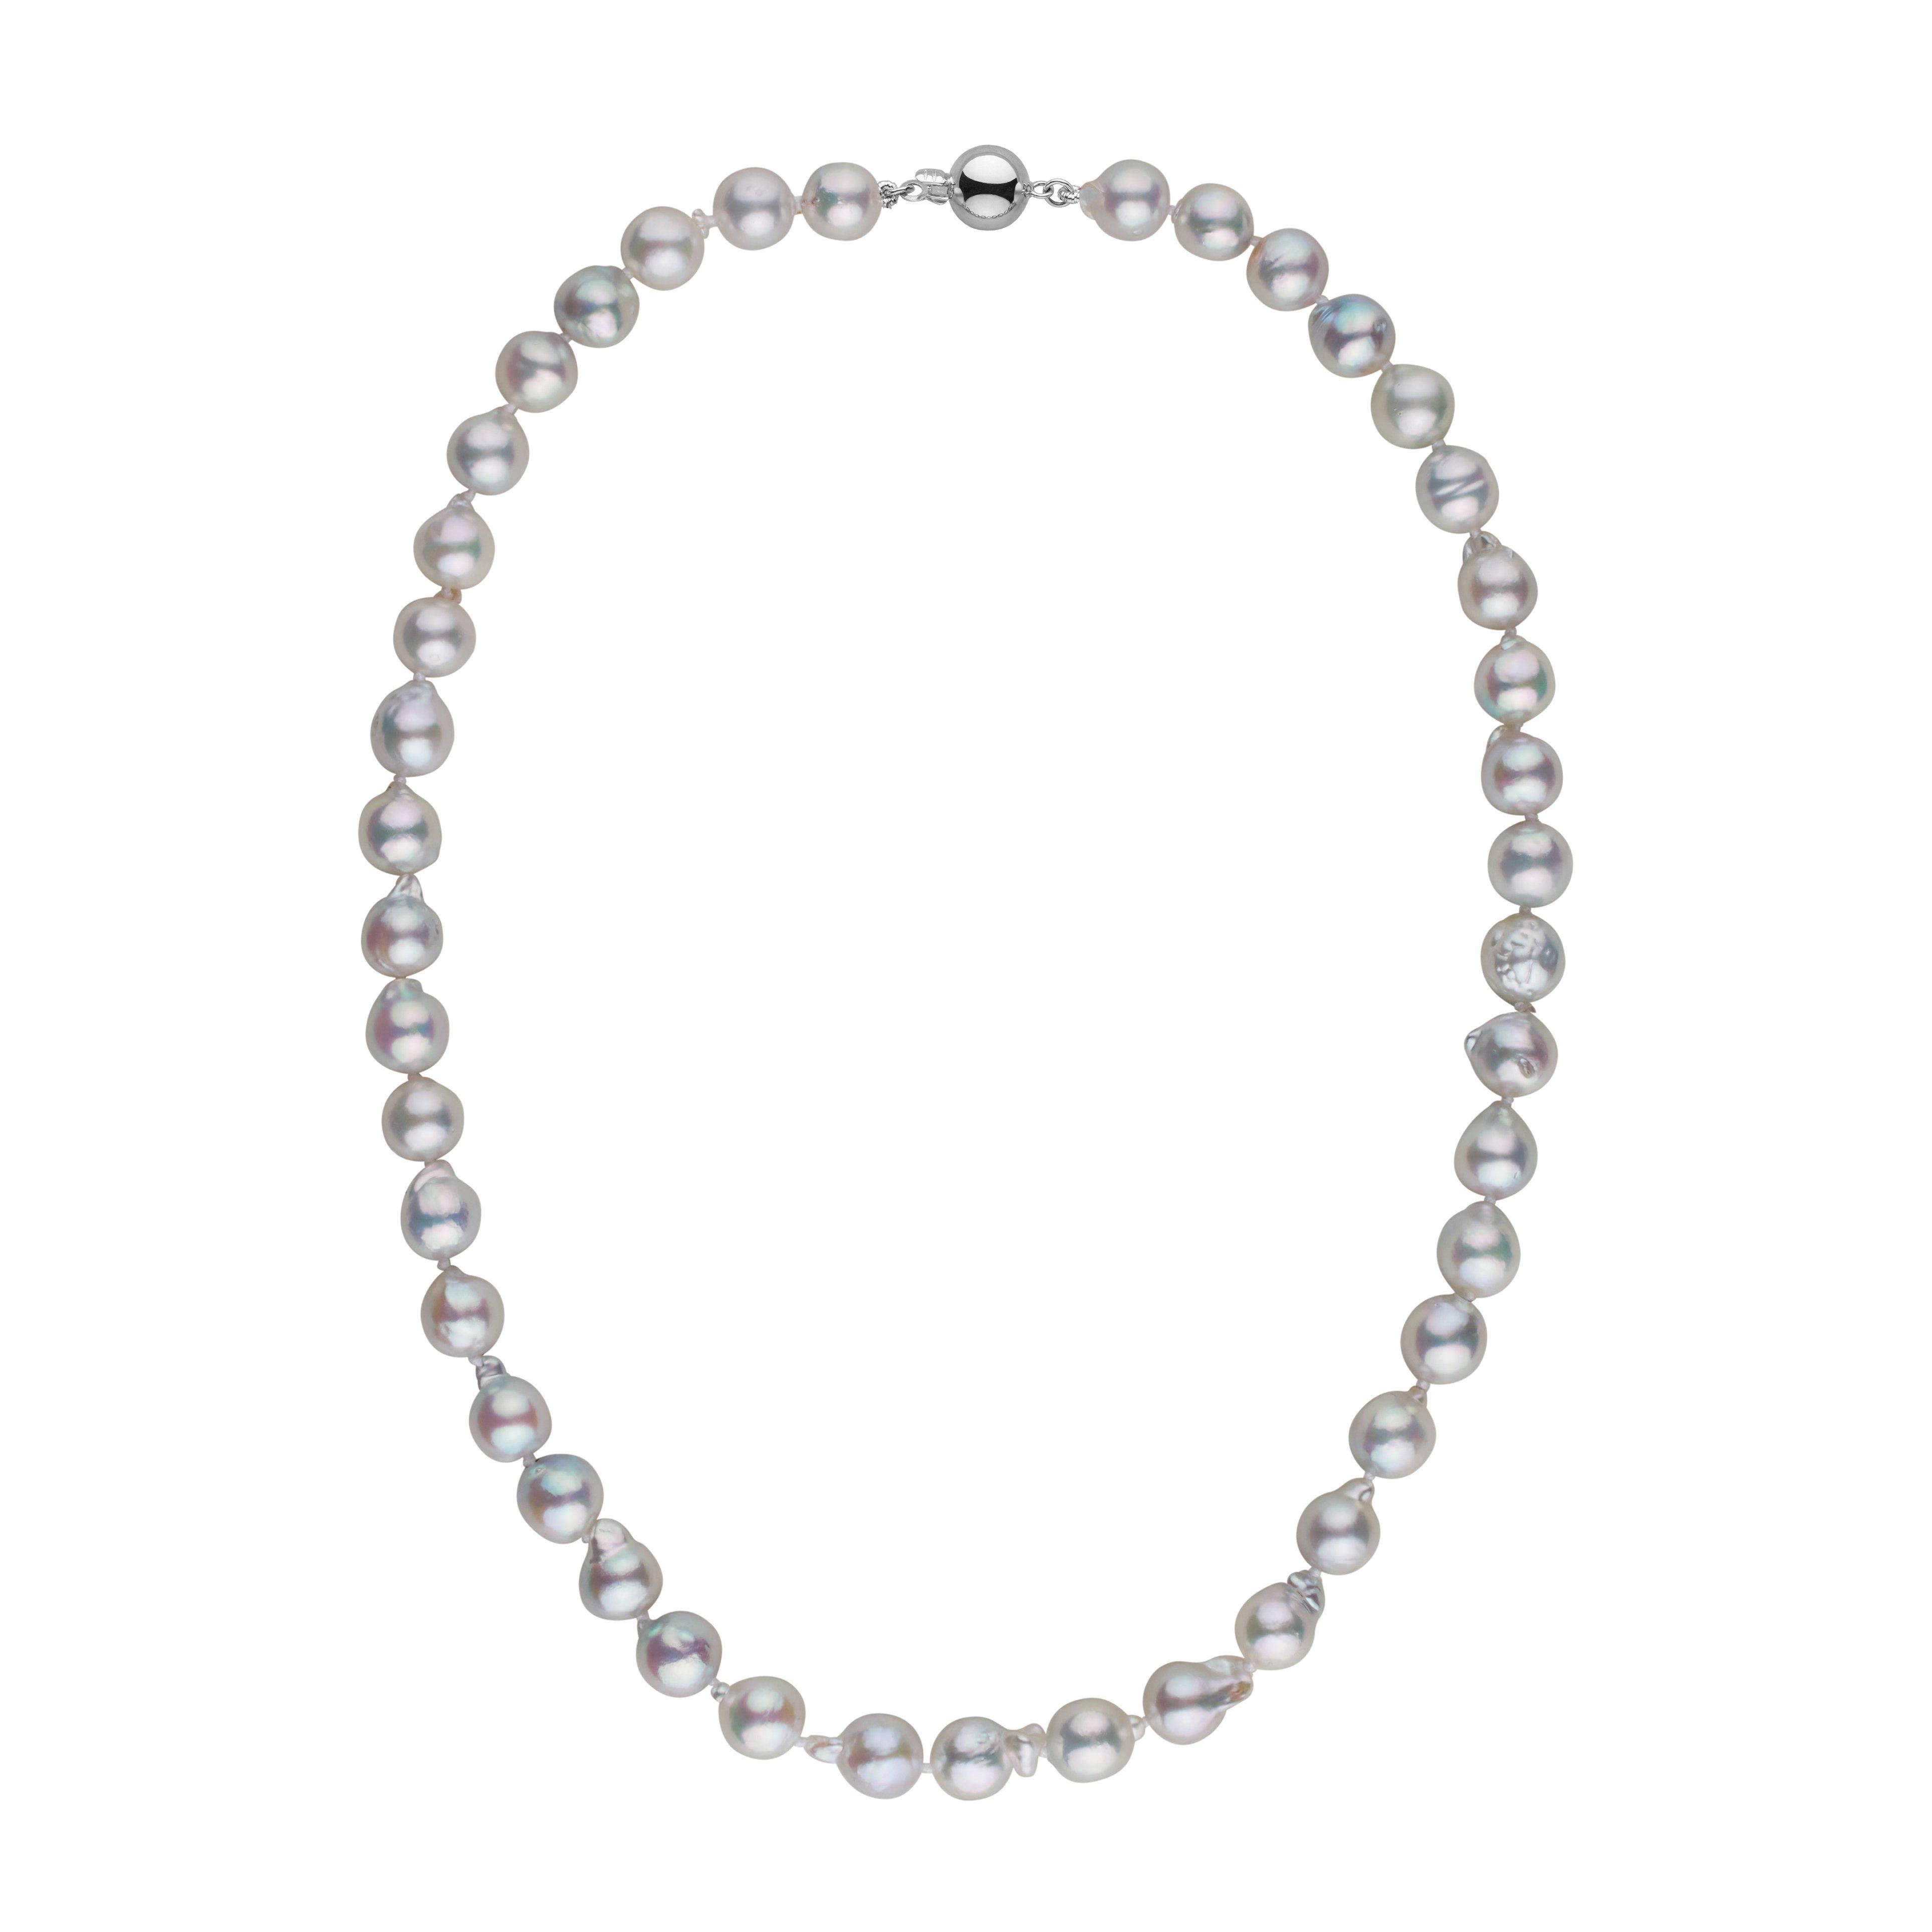 8.0-8.5 mm 18 Inch Silver-Blue Akoya Baroque Pearl Necklace white gold